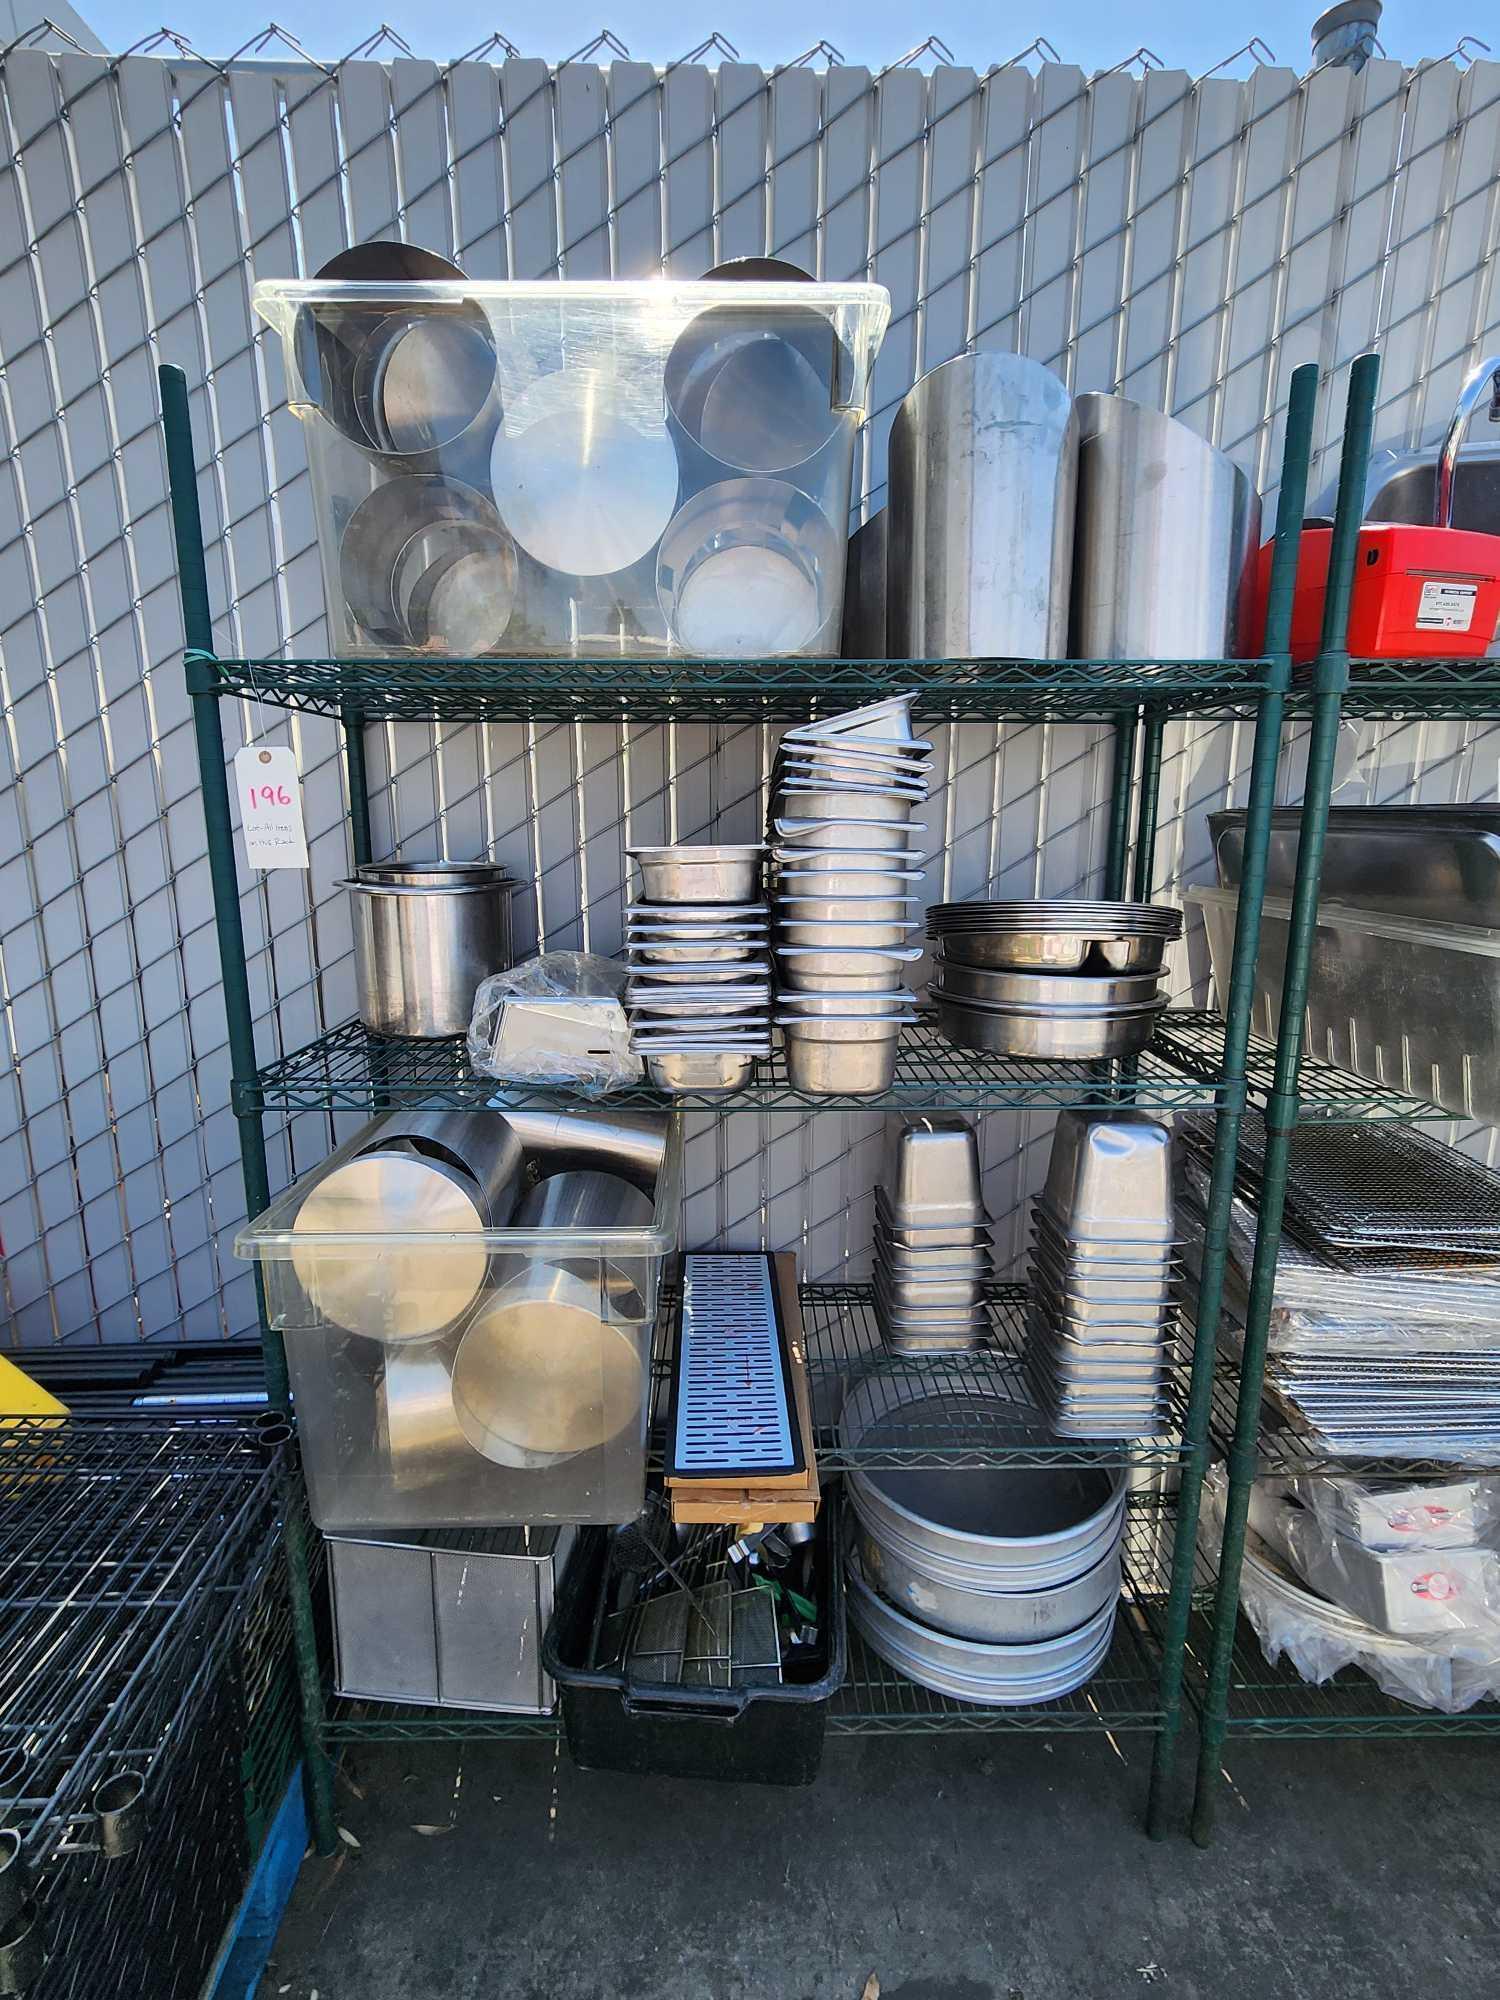 Lot - All Items on this Rack